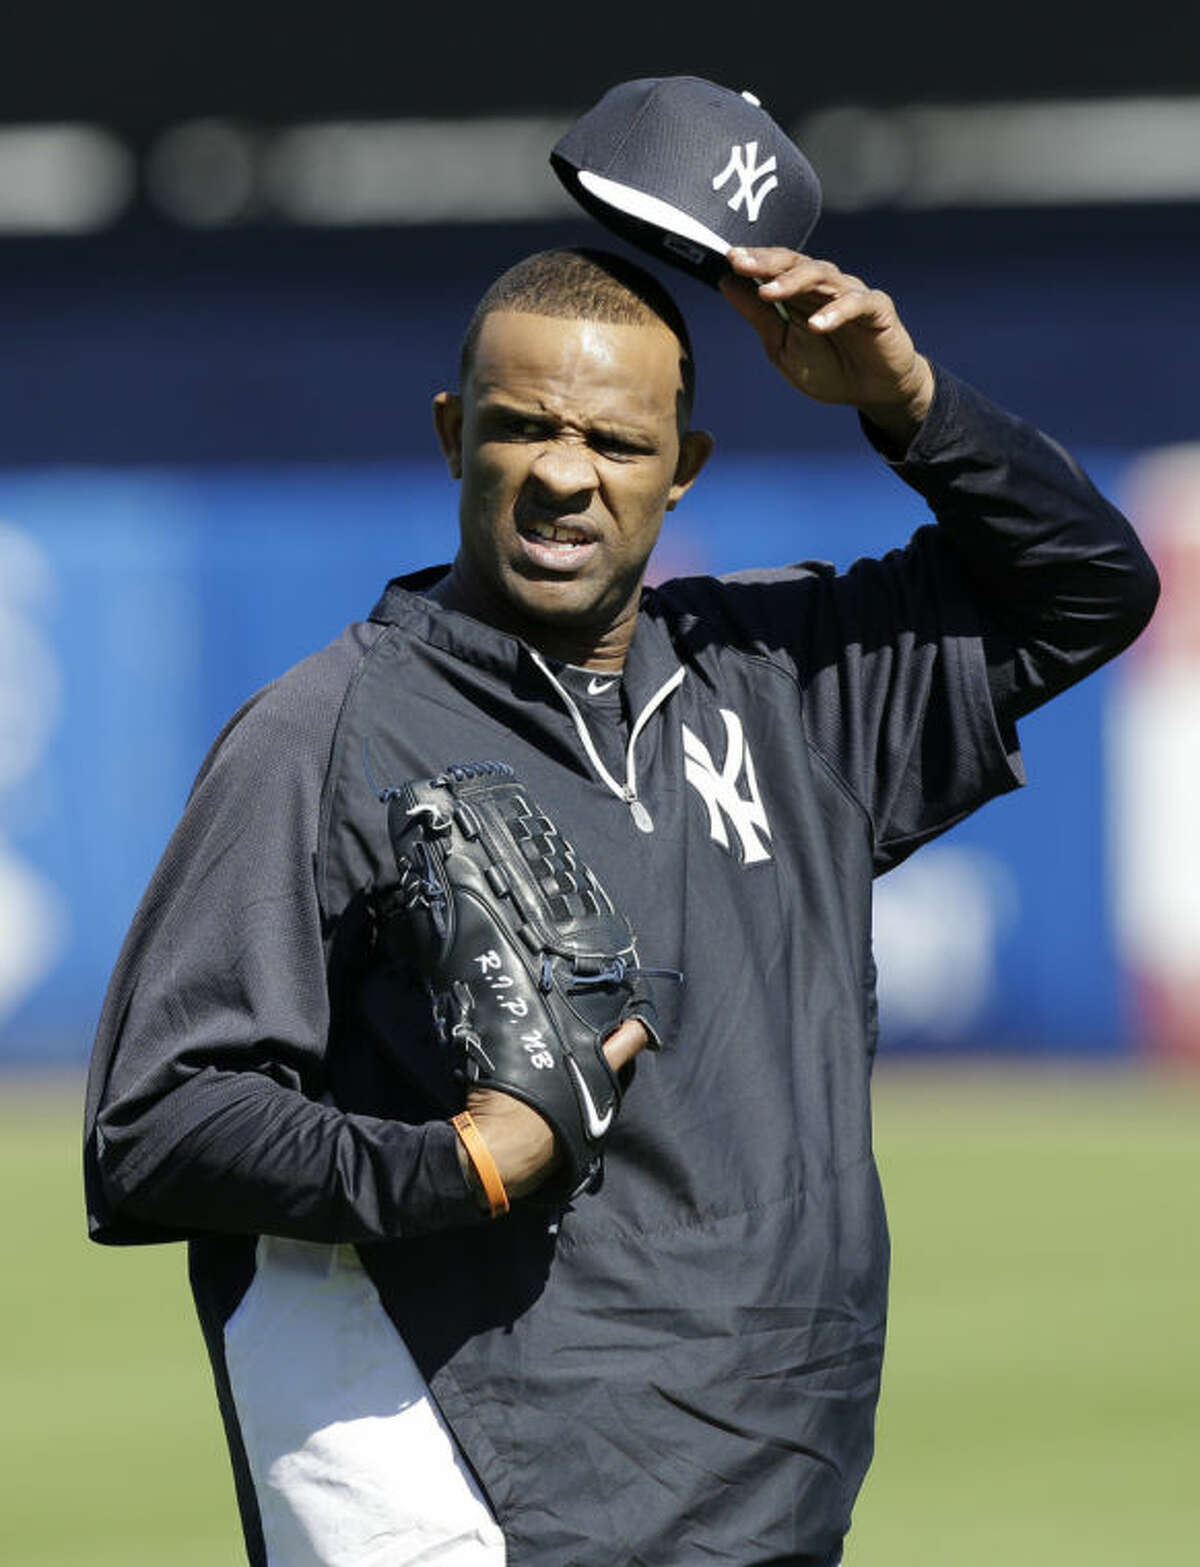 New York Yankees starting pitcher CC Sabathia waits to throw in the outfield during spring training baseball practice Friday, Feb. 14, 2014, in Tampa, Fla. (AP Photo/Charlie Neibergall)